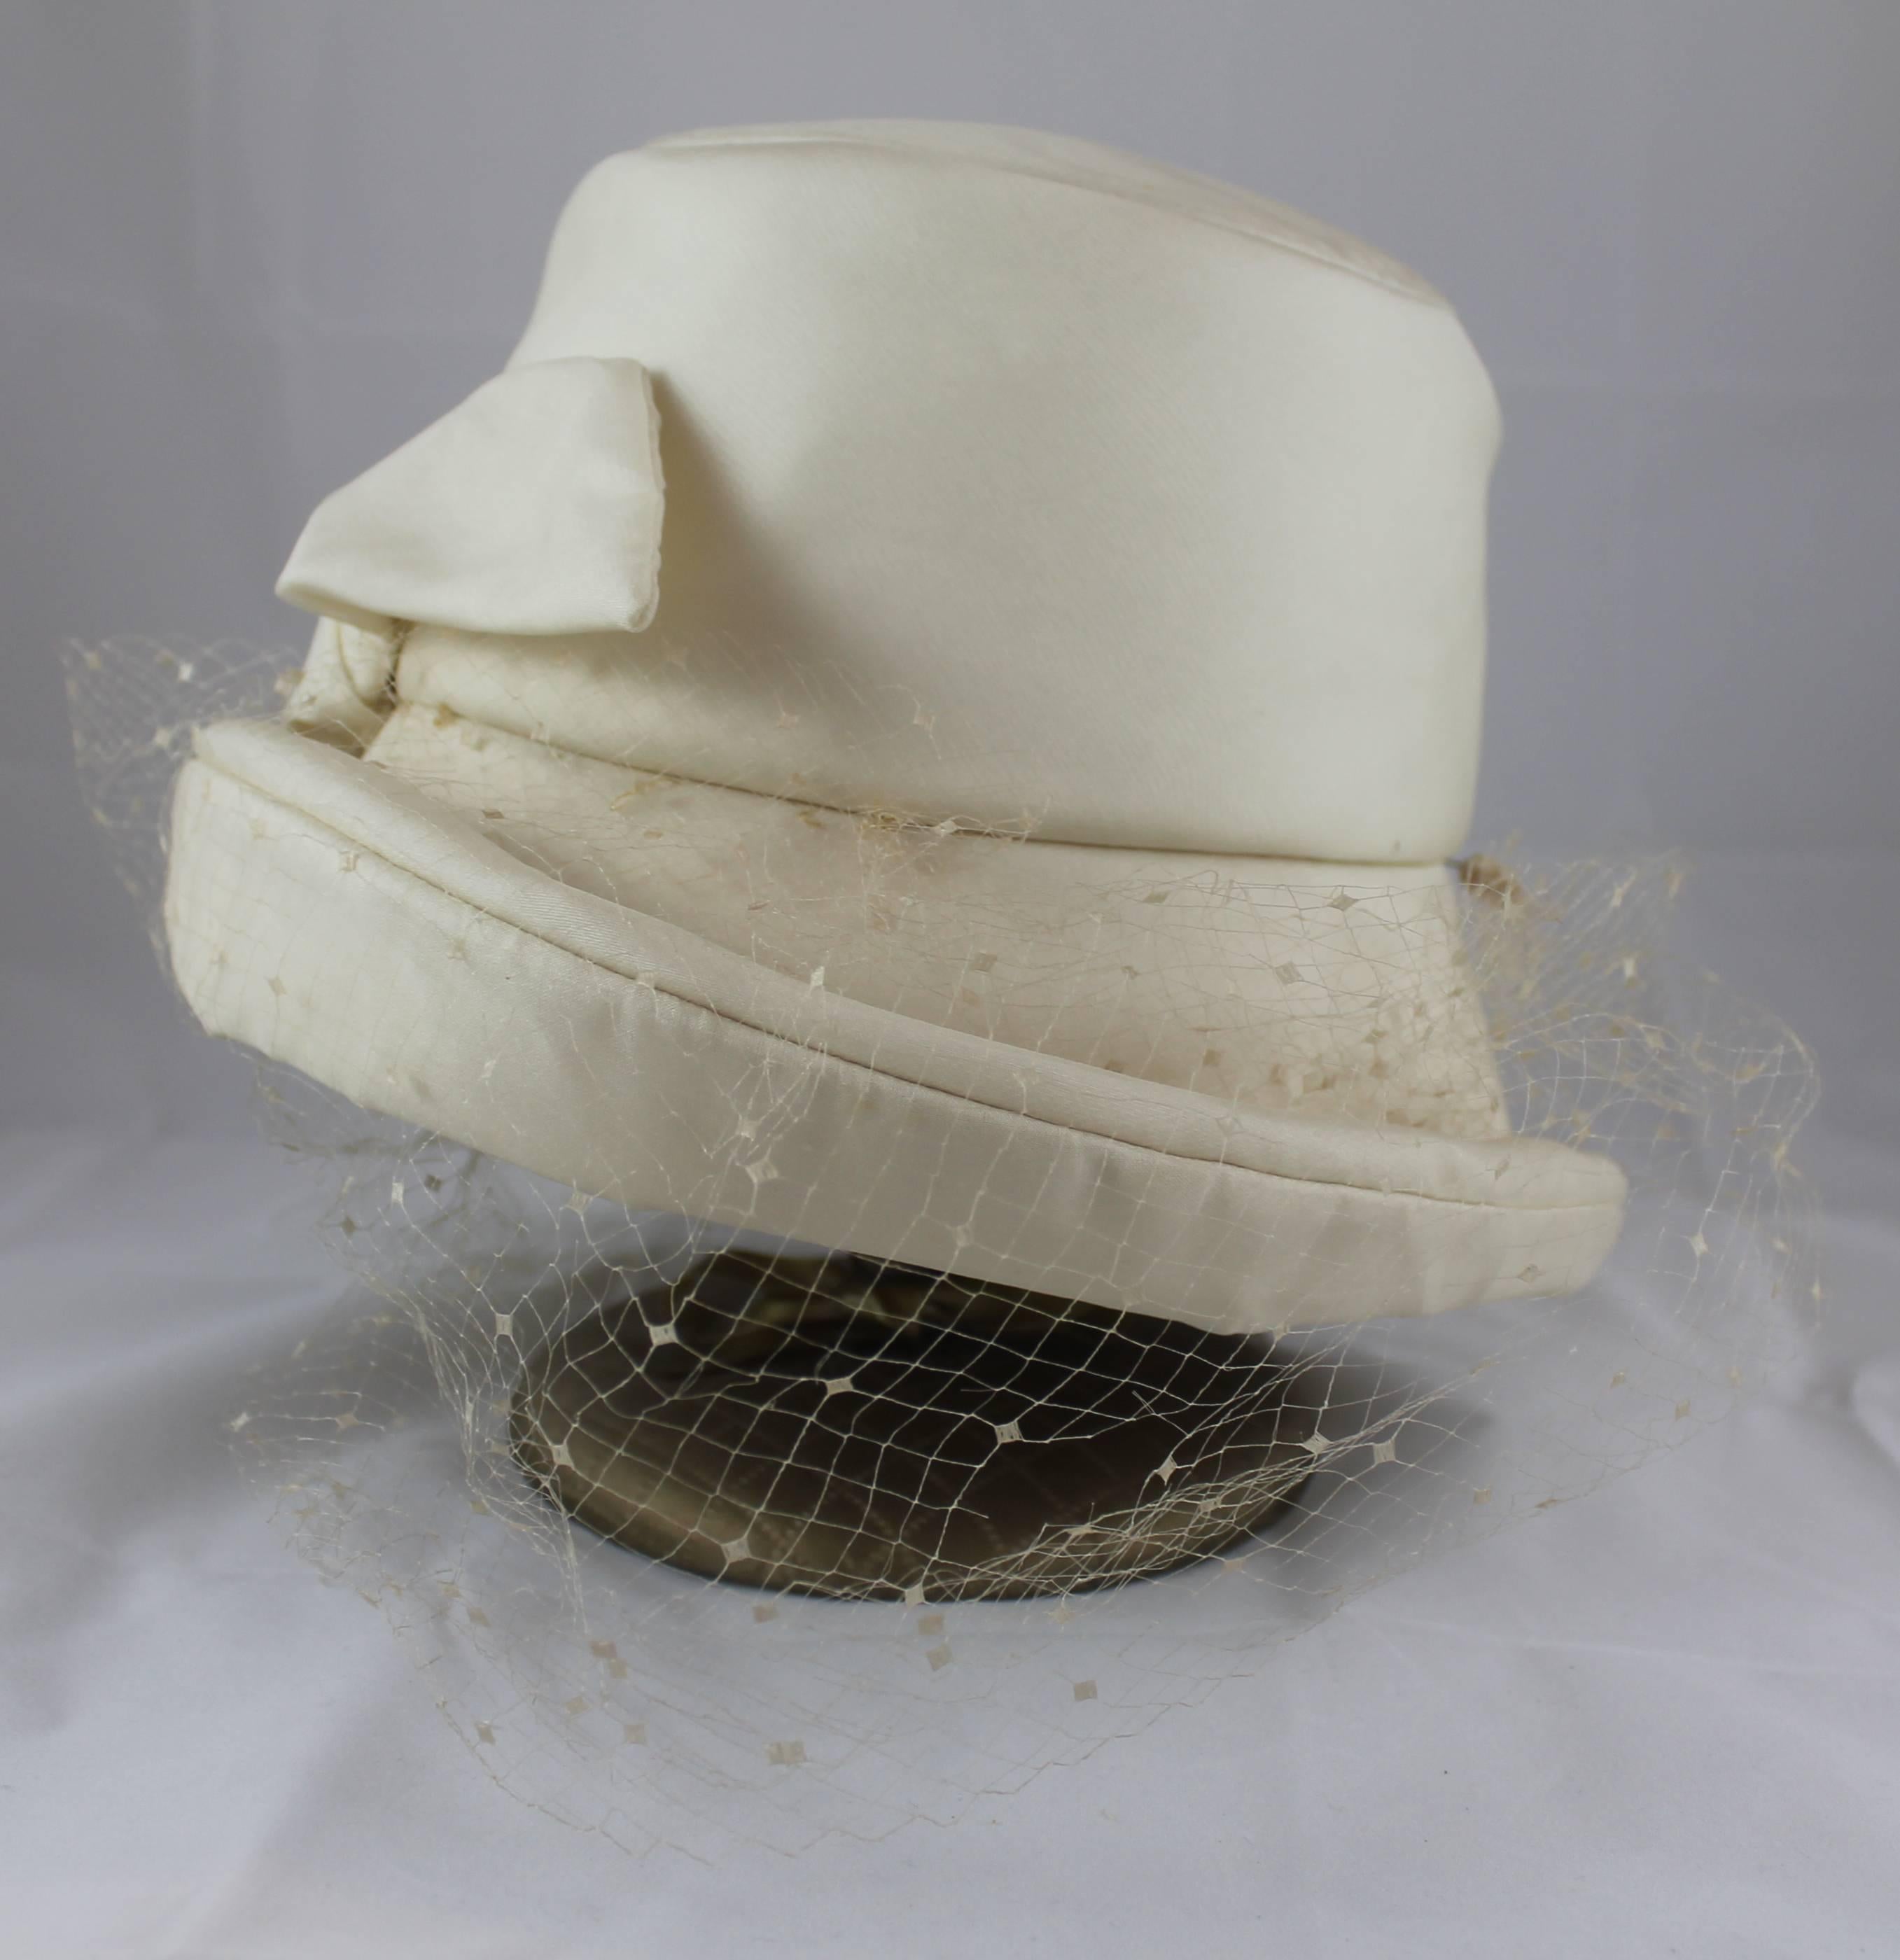 Fleurette Ivory Silk Hat with Bow, Mesh, and Pins. This hat has a front bow and mesh overlay. It has a Gatsby- style feeling to it and the mesh is connected by pins. It is in very good condition with some spots on the top of the inside, a small